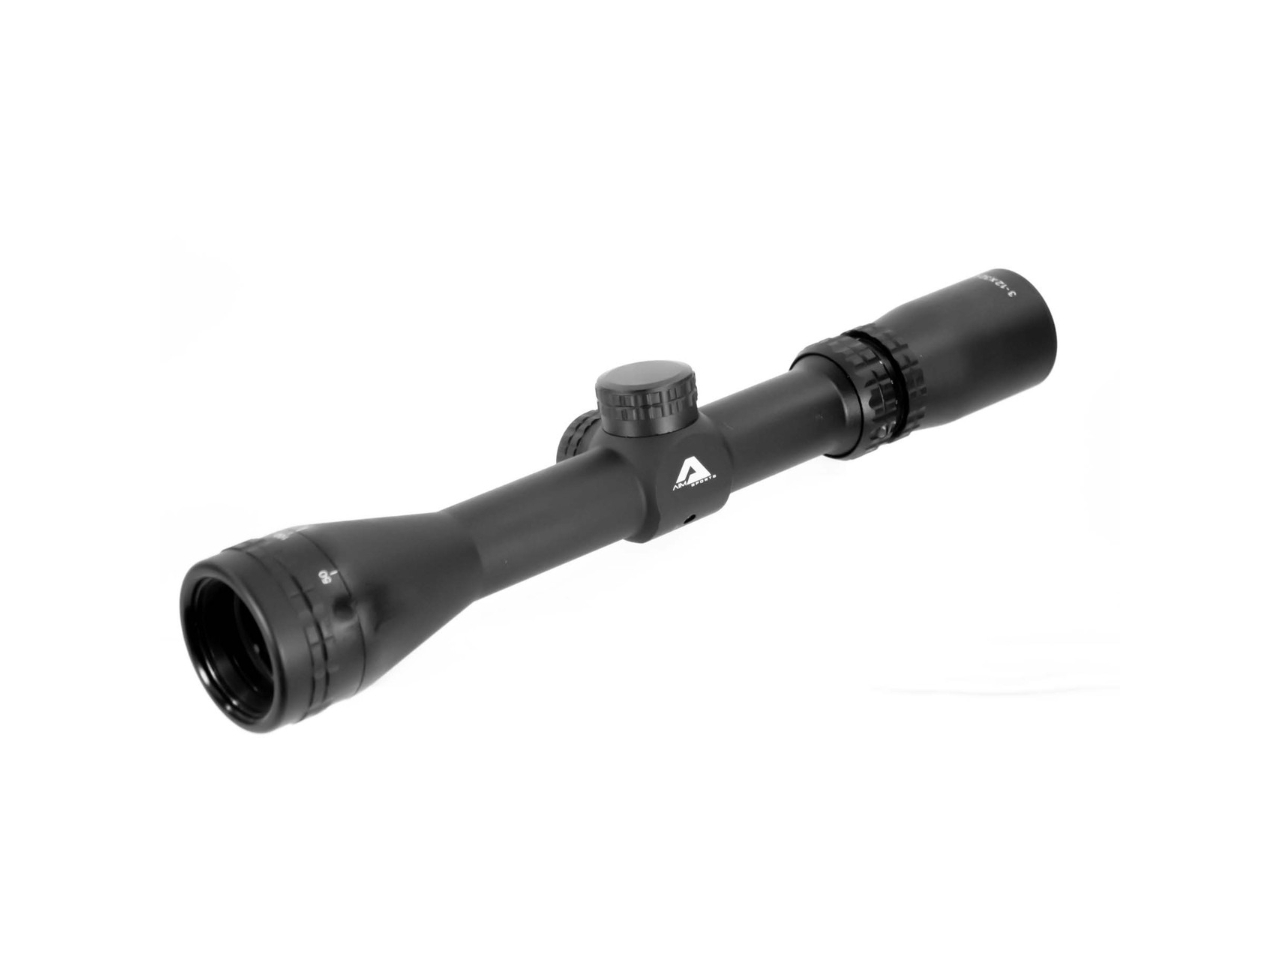 AIM 3-12x32 1 In. Scout Scope - AO & Mil-dot Reticle